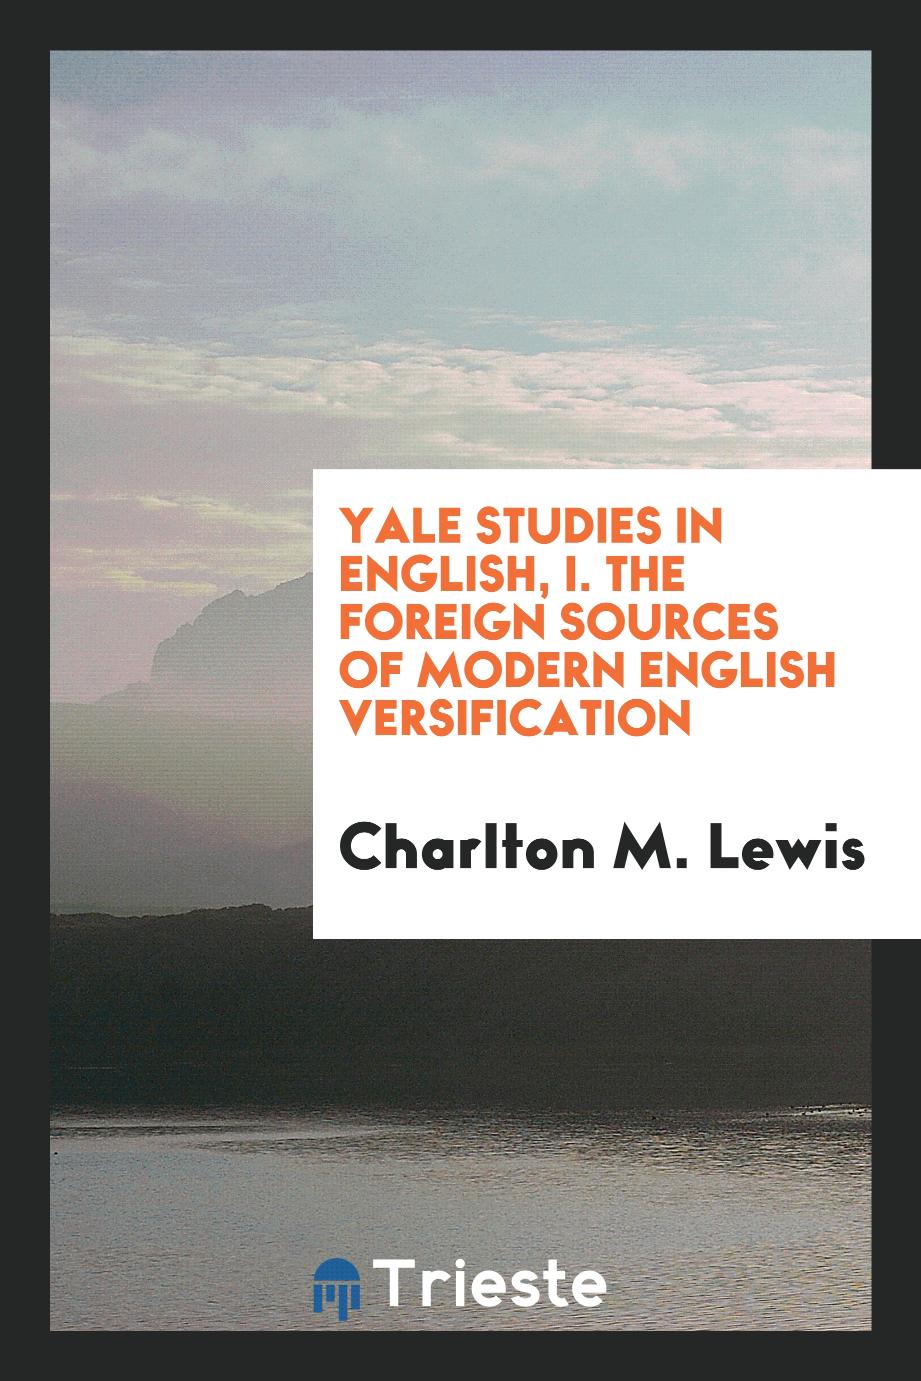 Yale Studies in English, I. The Foreign Sources of Modern English Versification